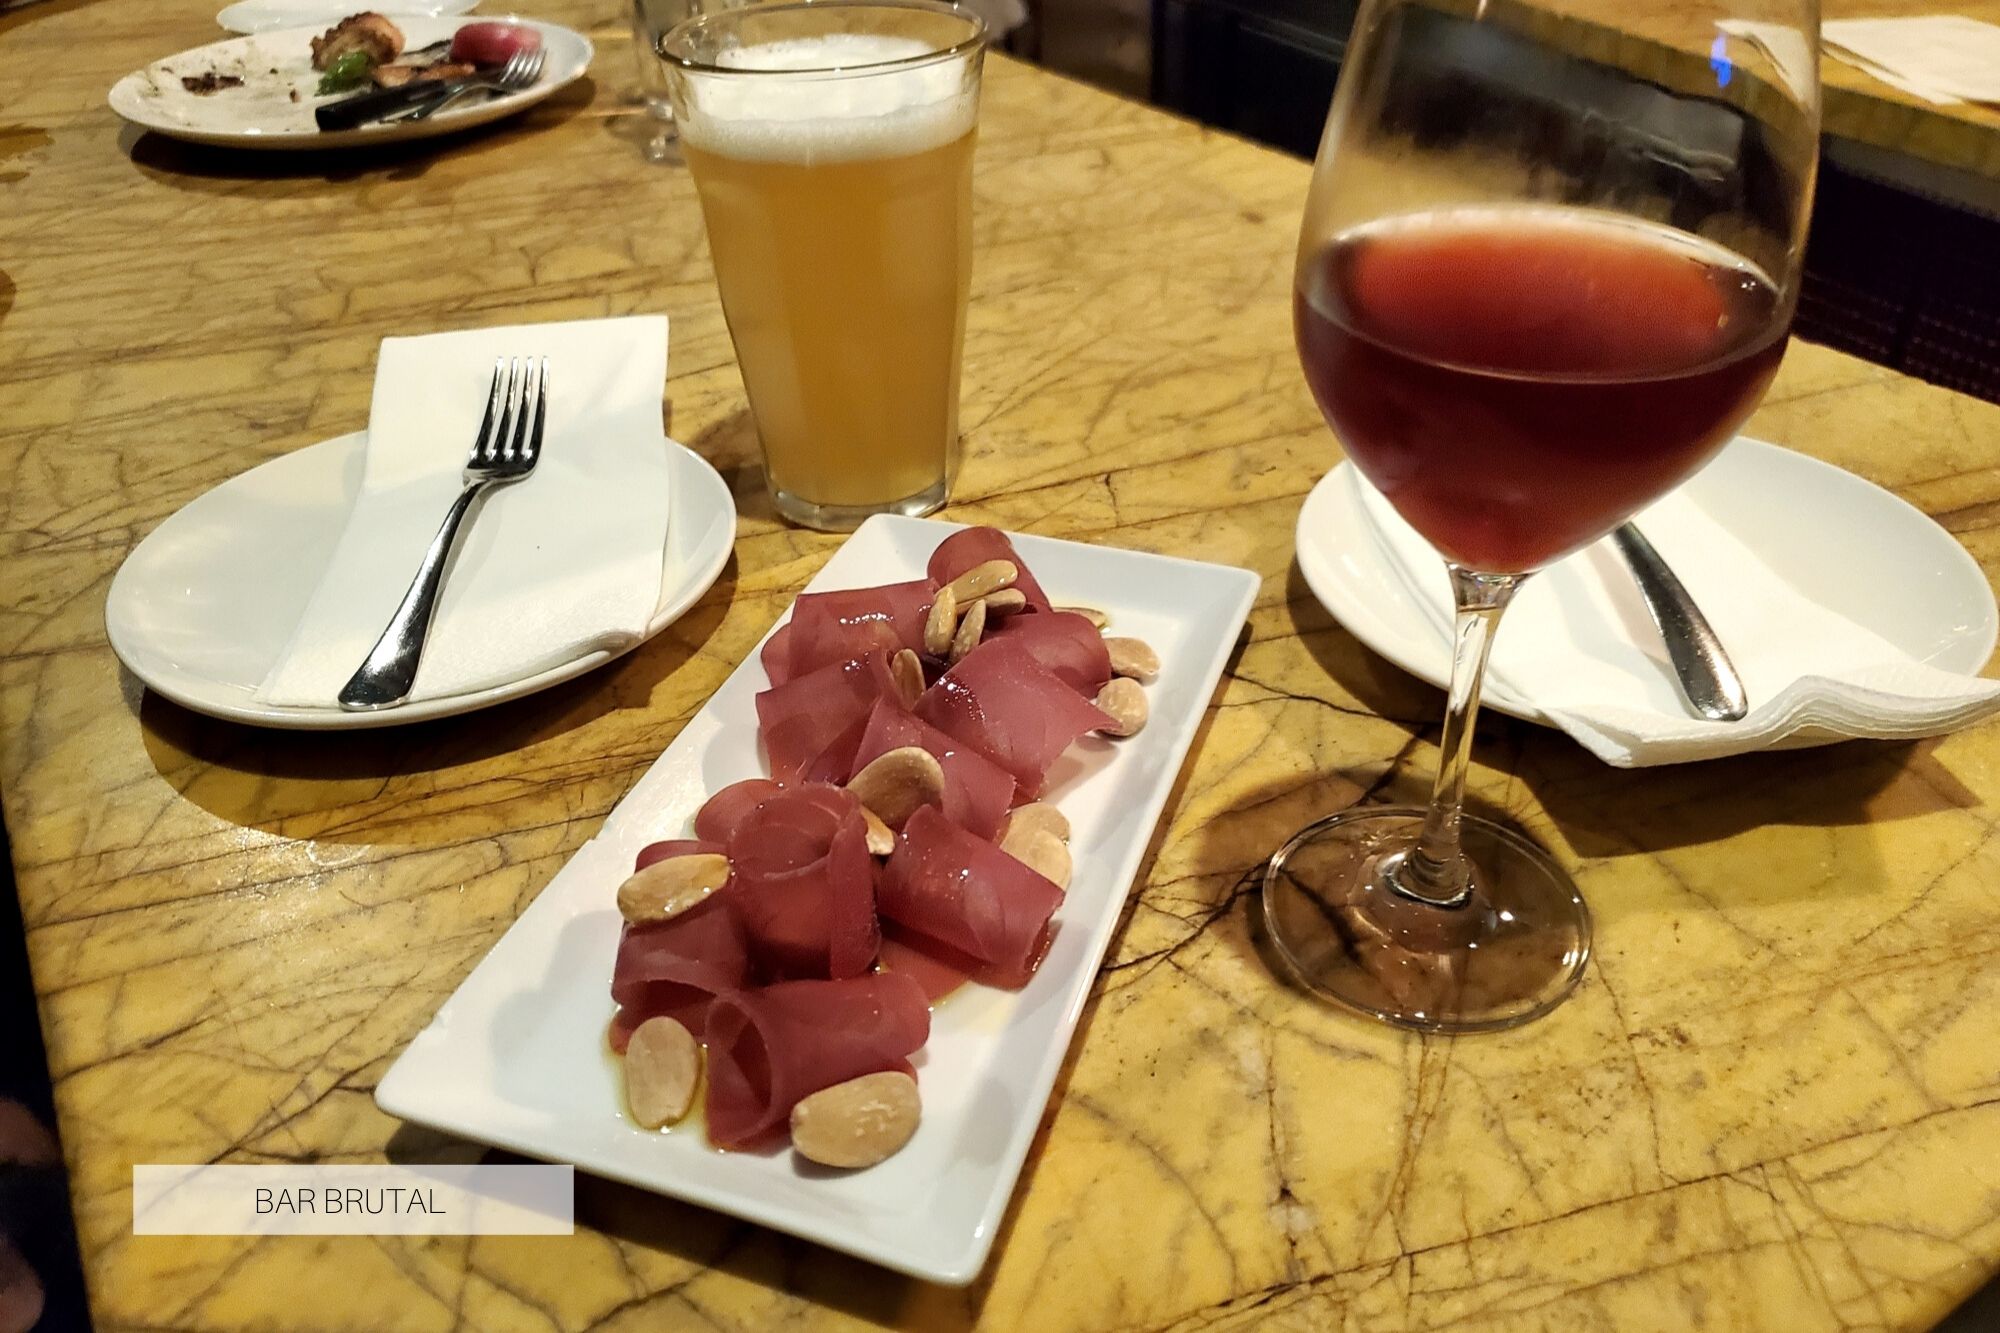 Dried tuna, a a glass of wine, and a beer at Bar Brutal